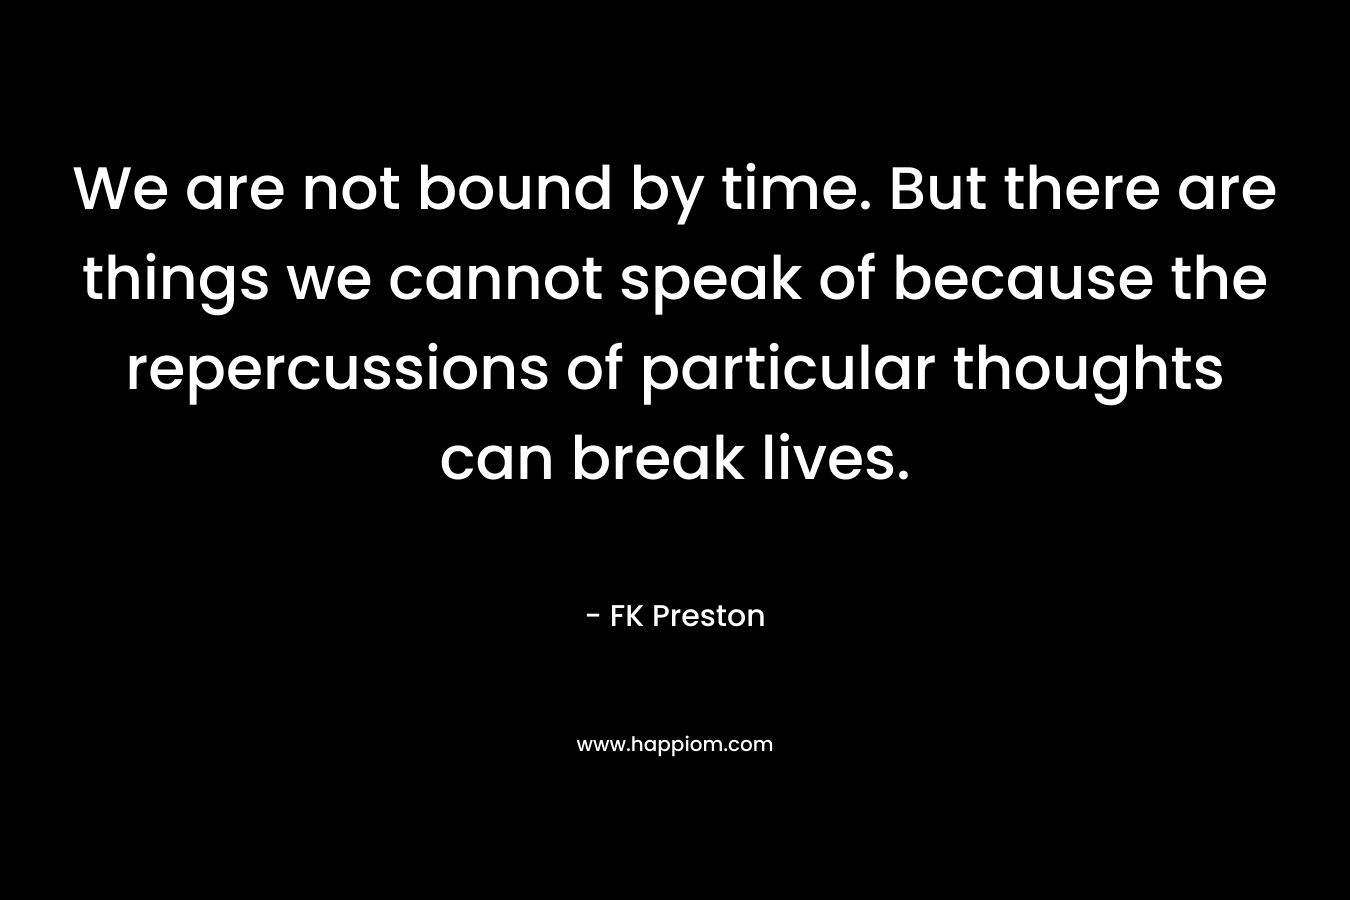 We are not bound by time. But there are things we cannot speak of because the repercussions of particular thoughts can break lives. – FK Preston